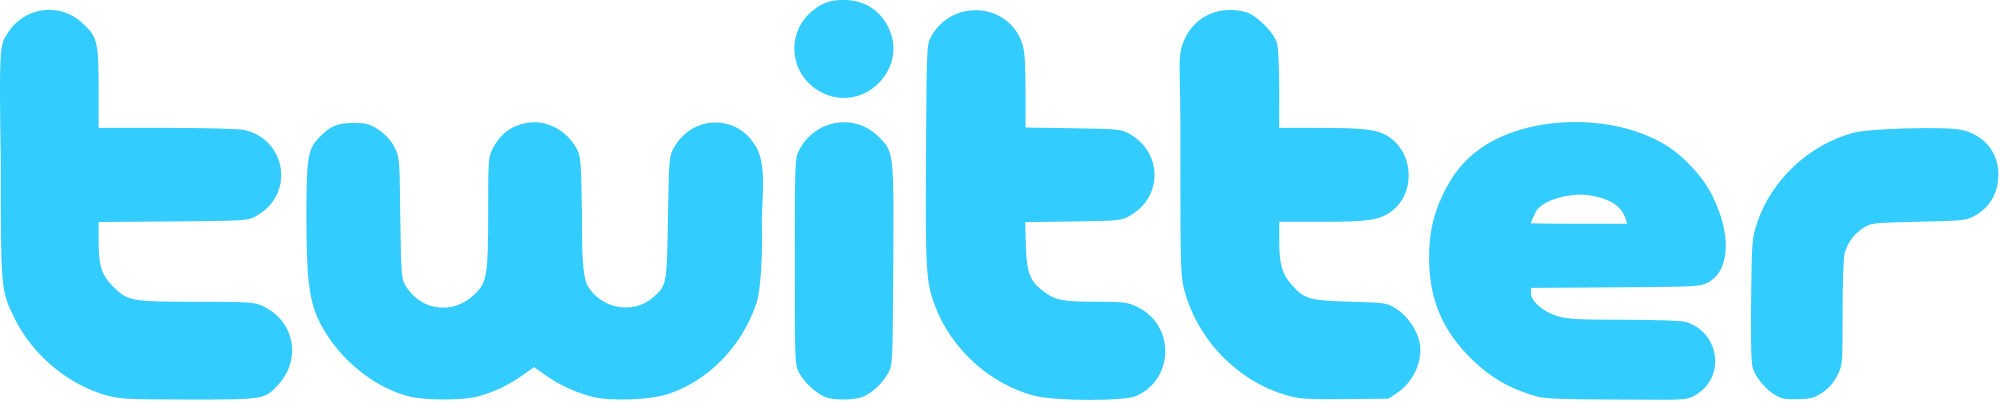 twitter-logo-png-open-2000.png